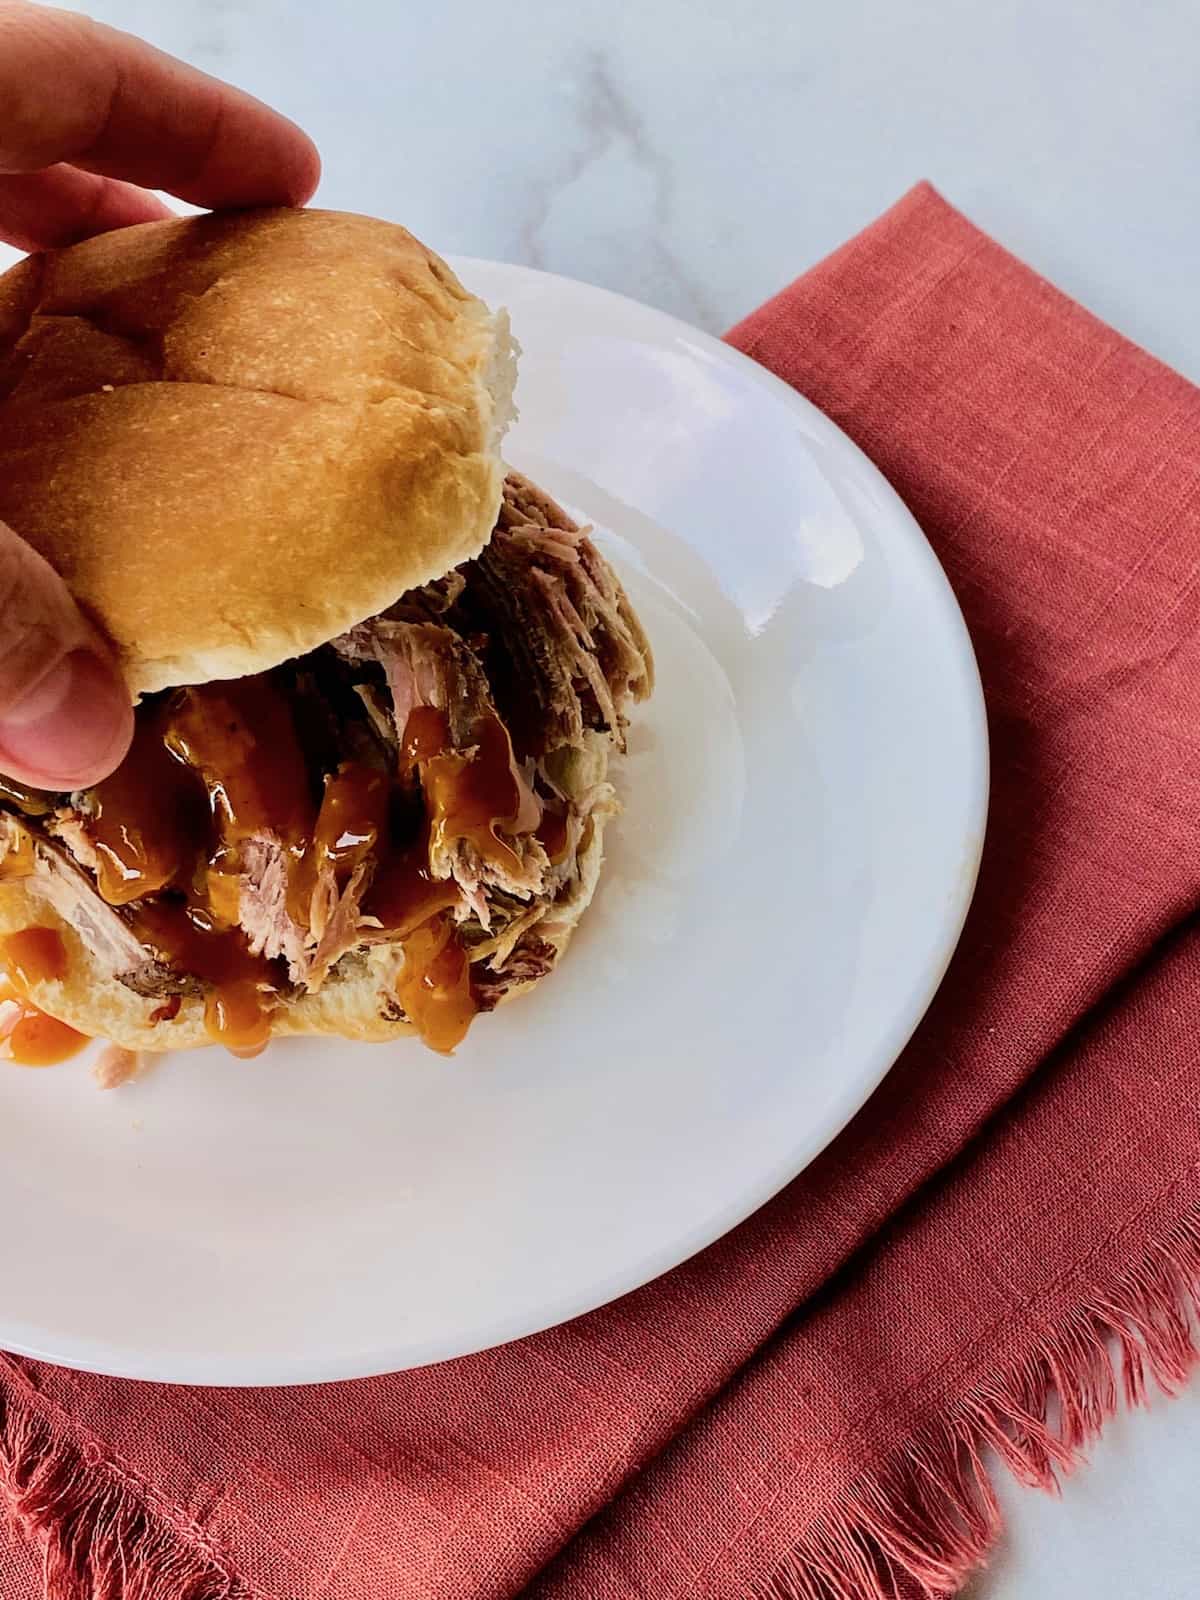 Smoked Pulled Pork Shoulder (pork butt) Hand adding the top bun to a pulled pork with bbq sauce sandwich.